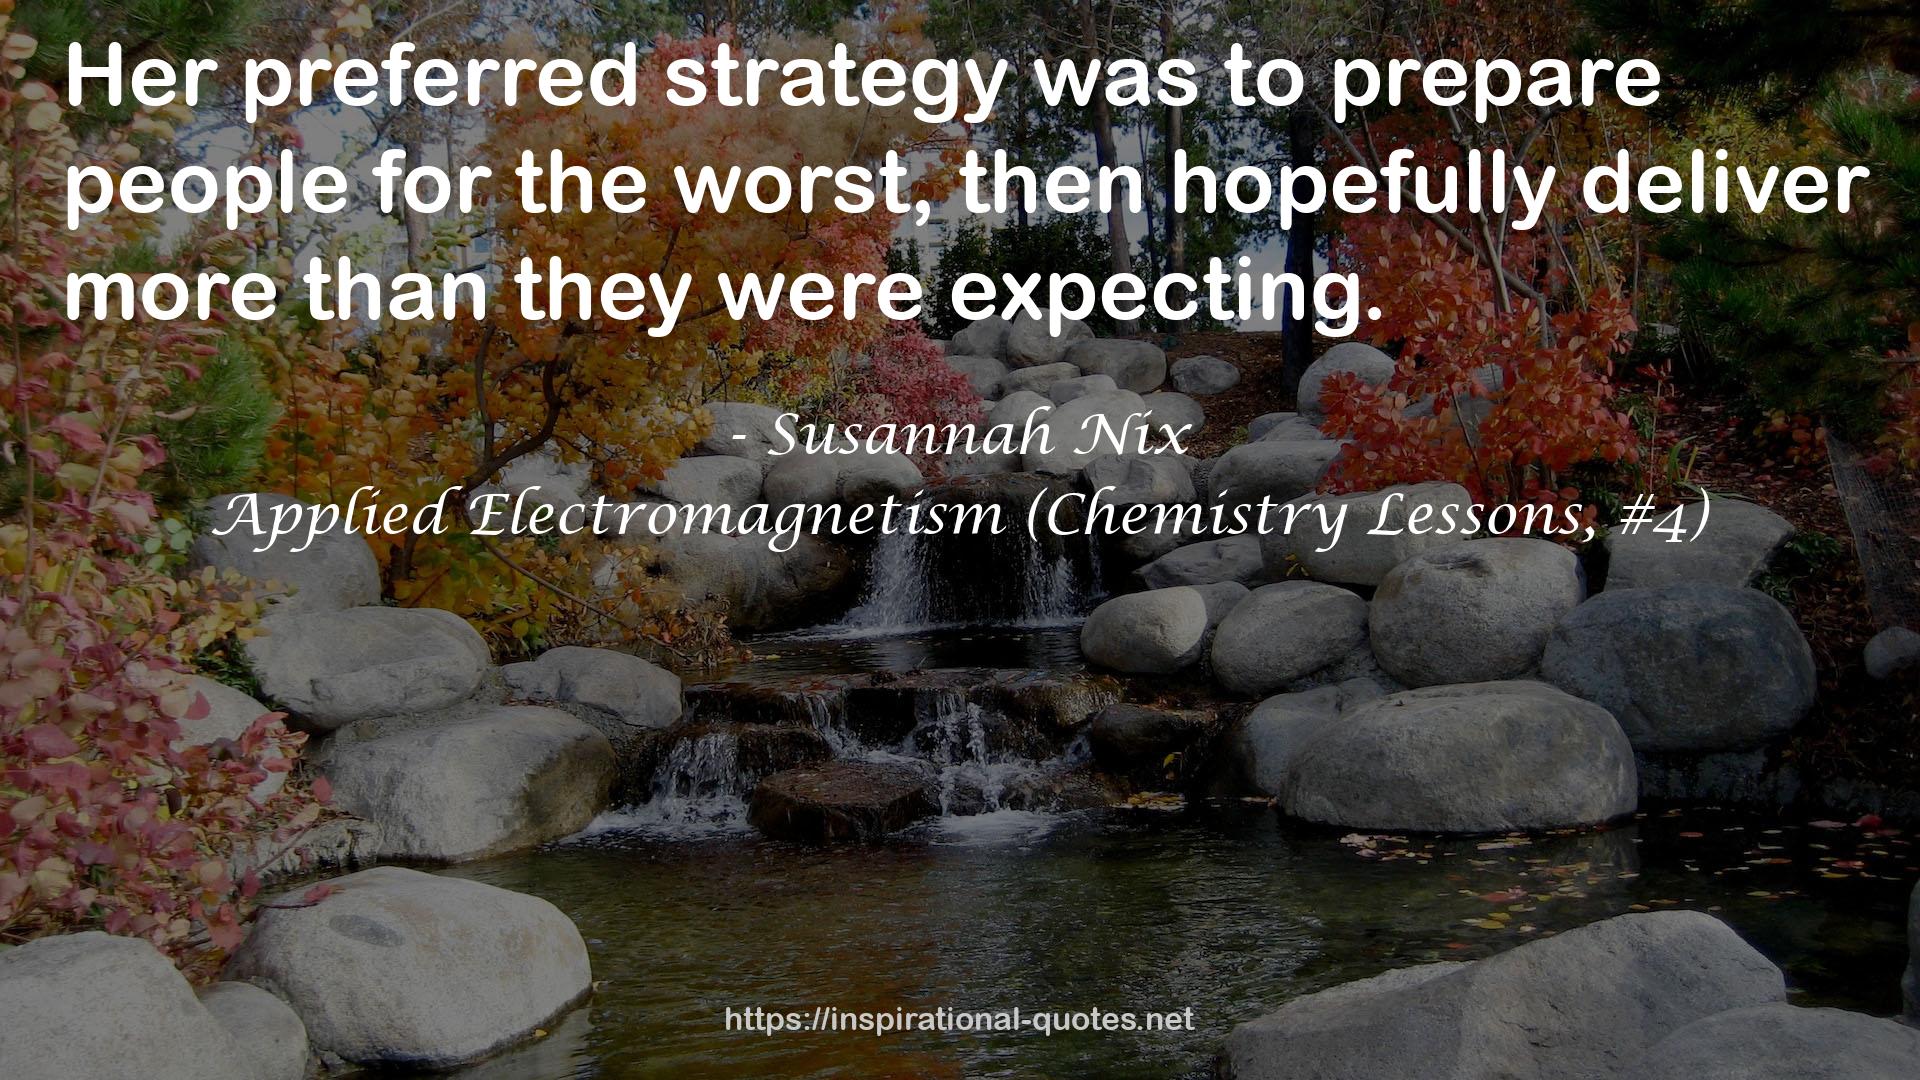 Applied Electromagnetism (Chemistry Lessons, #4) QUOTES